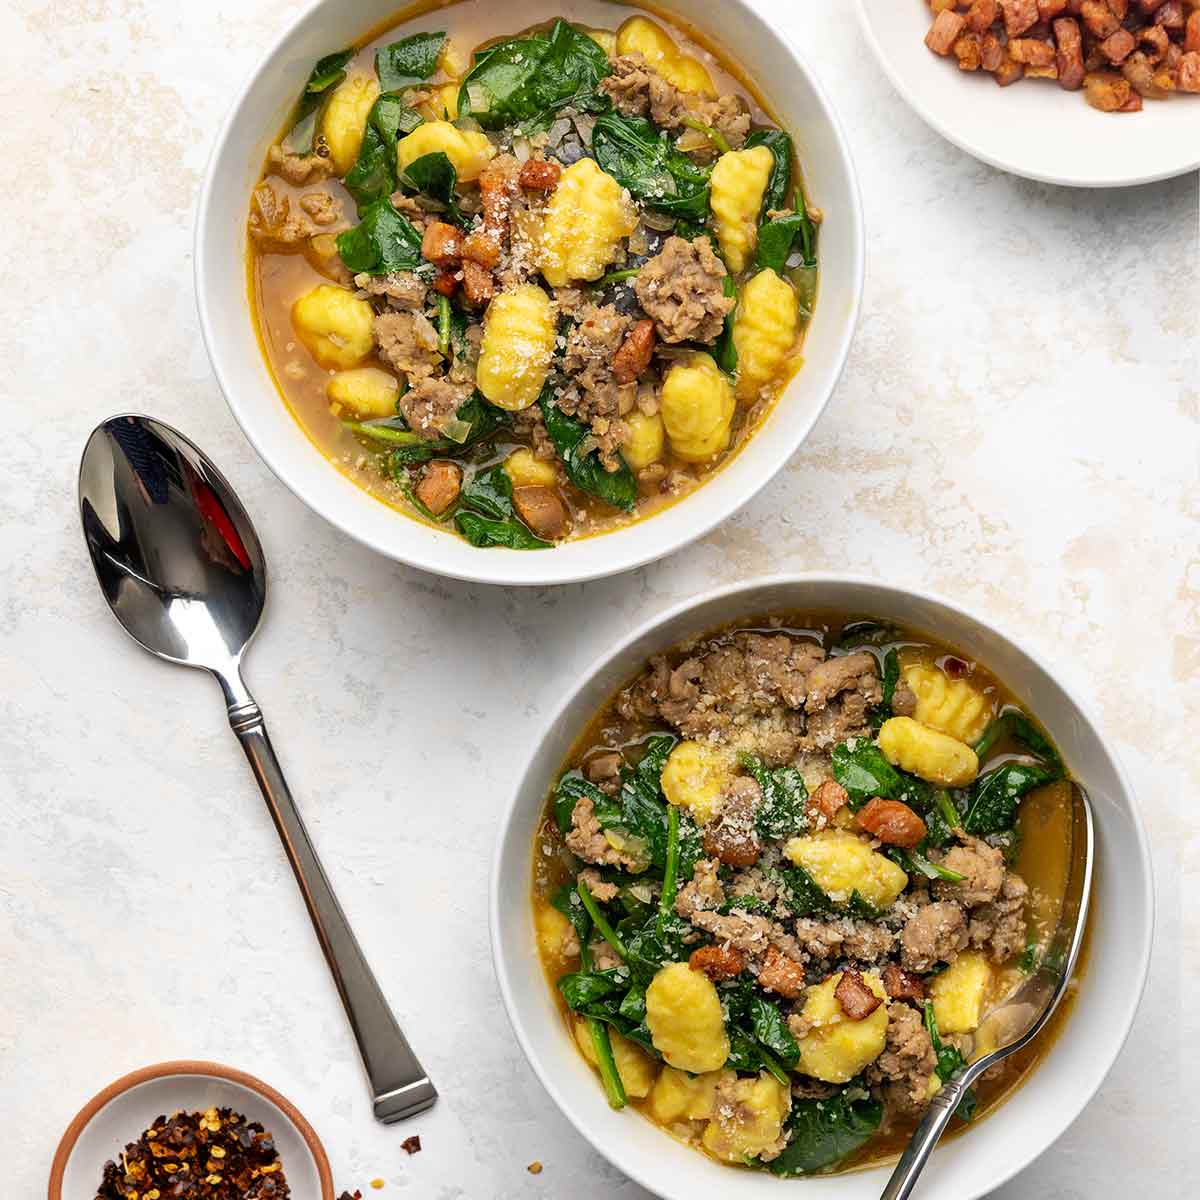 Two bowls of Italian sausage soup with gnocchi and spinach.